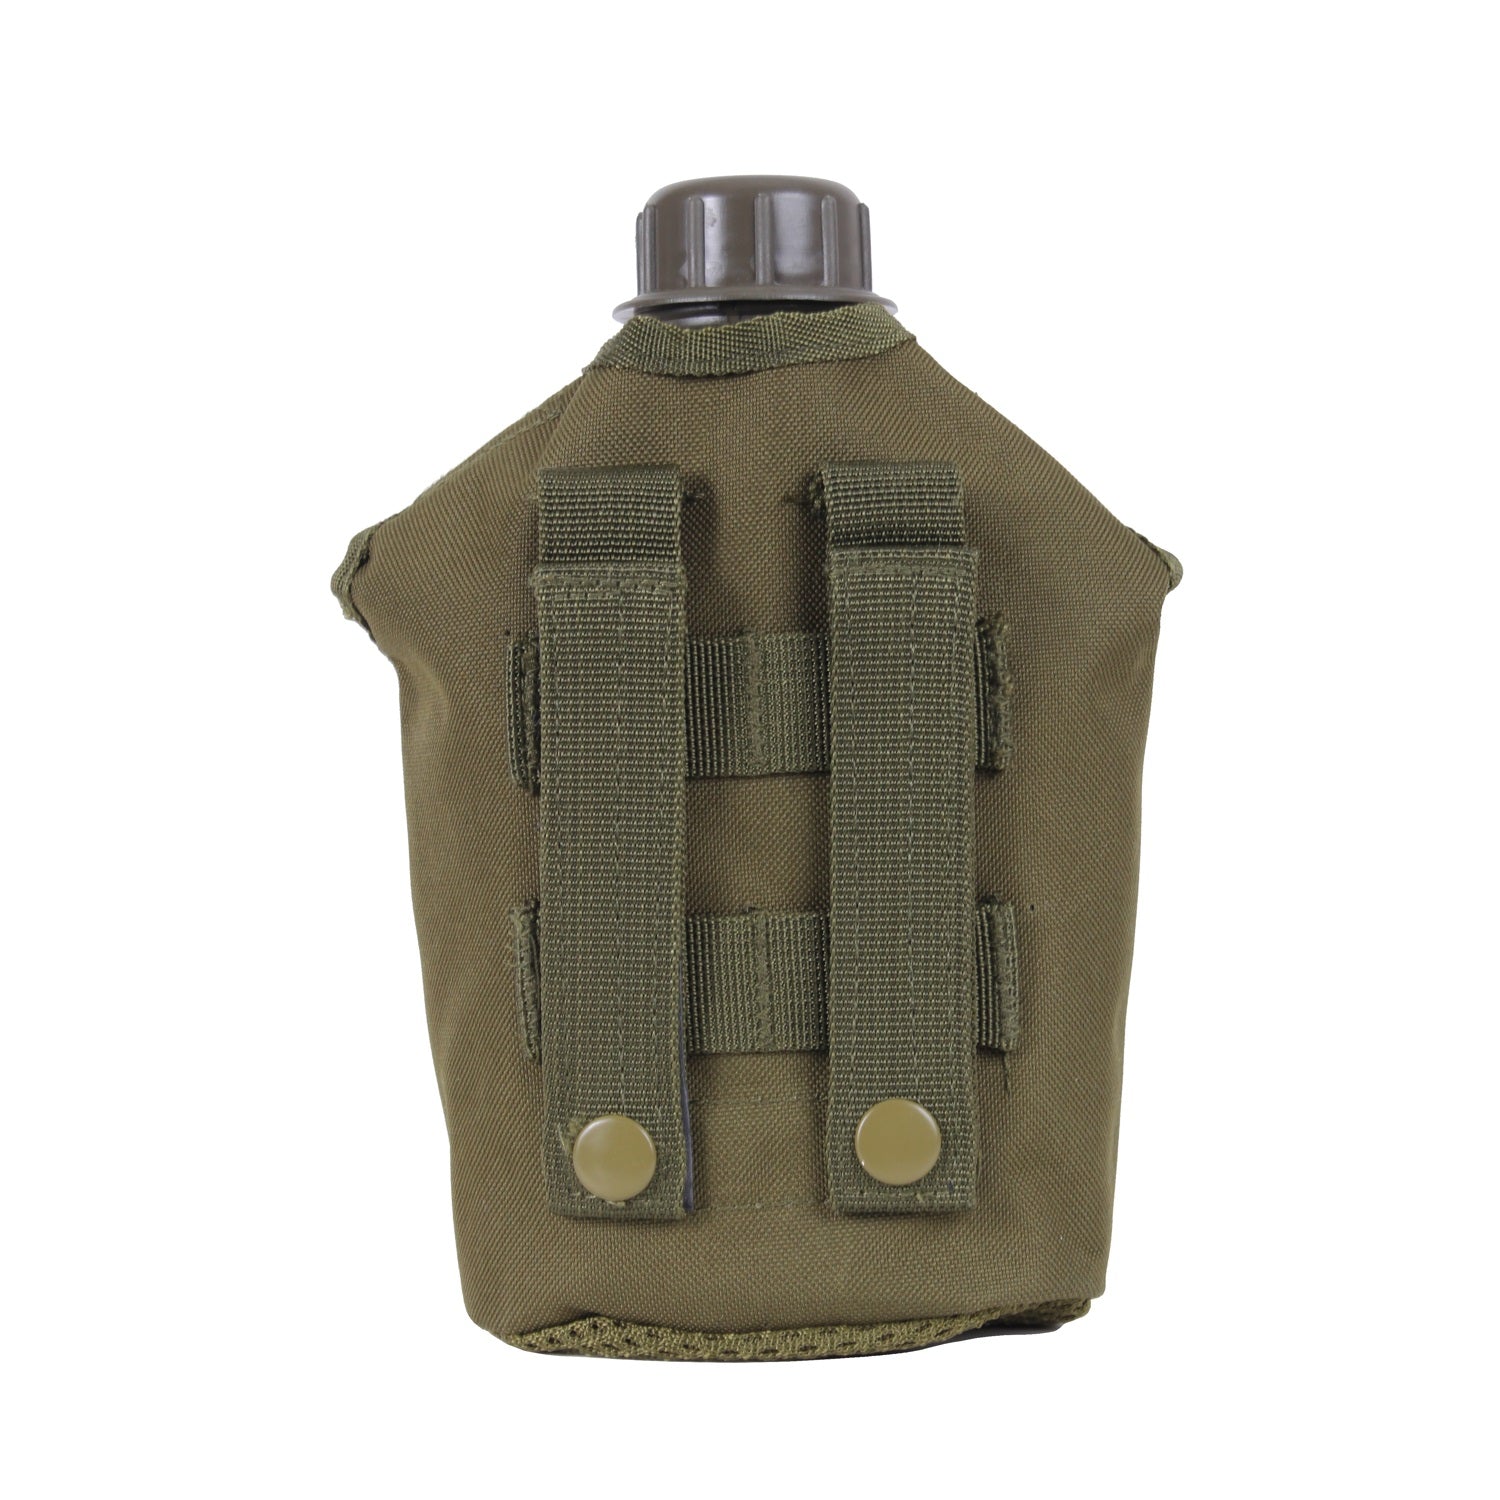 Rothco MOLLE Compatible 1 Quart Canteen Pouch / Cover Olive Drab